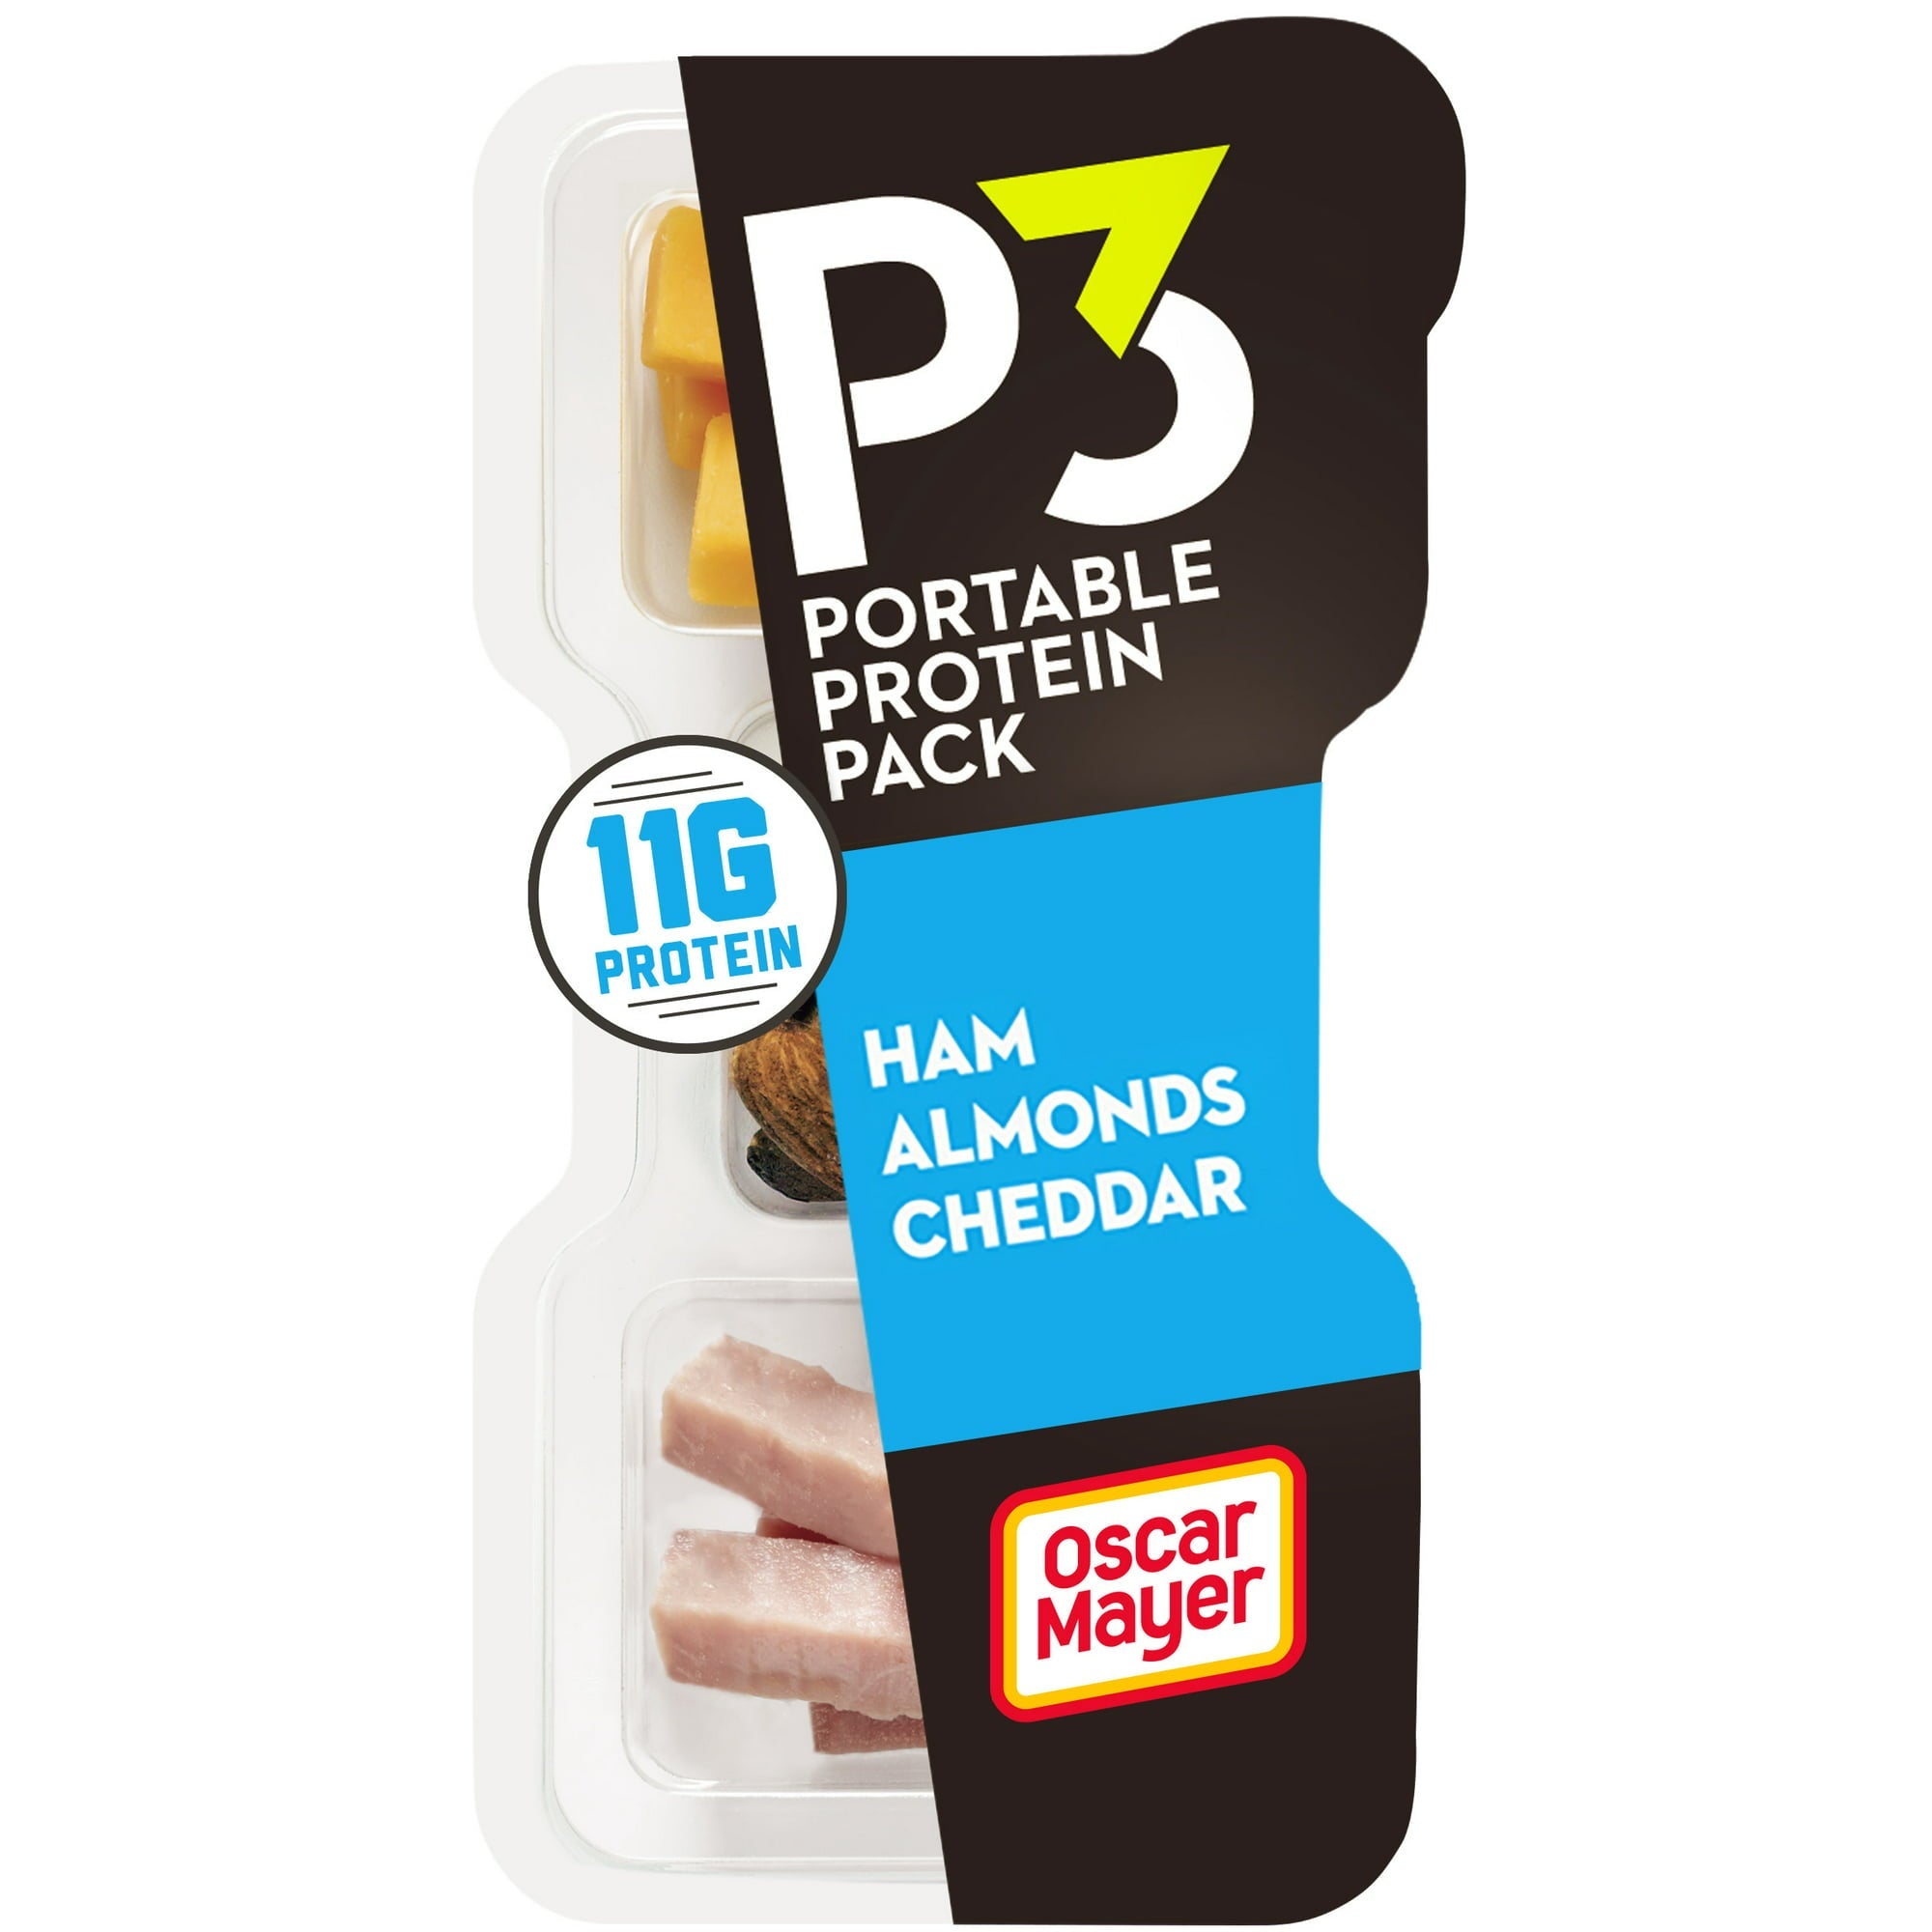 Oscar Mayer P3 Portable Protein Pack Smoked Ham, Almonds and Cheddar Cheese 2 Oz Tray